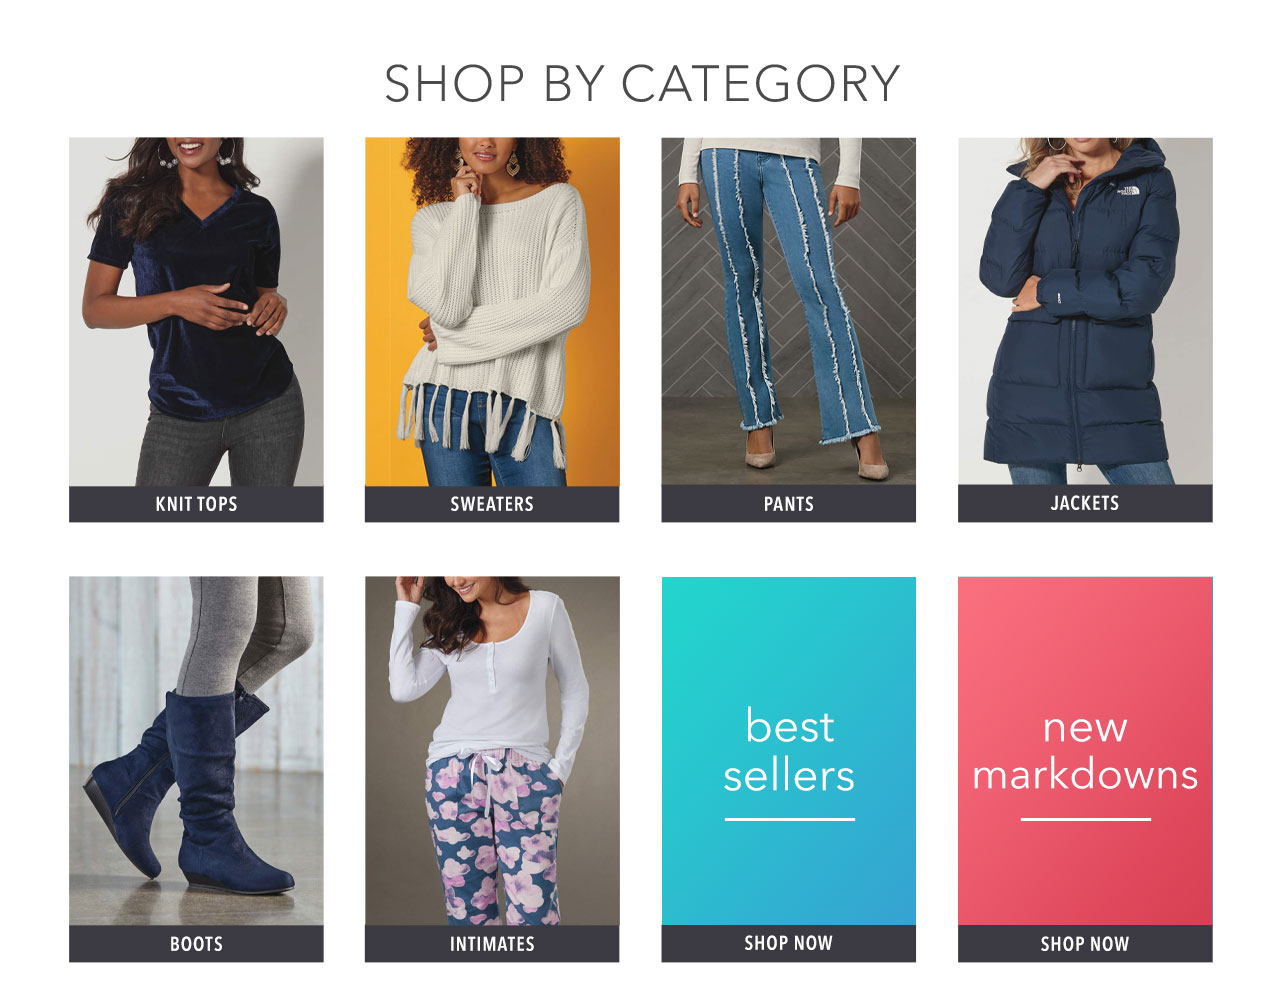 Shop knit tops, sweaters, pants, jackets, boots, intimates, best sellers, and clearance.